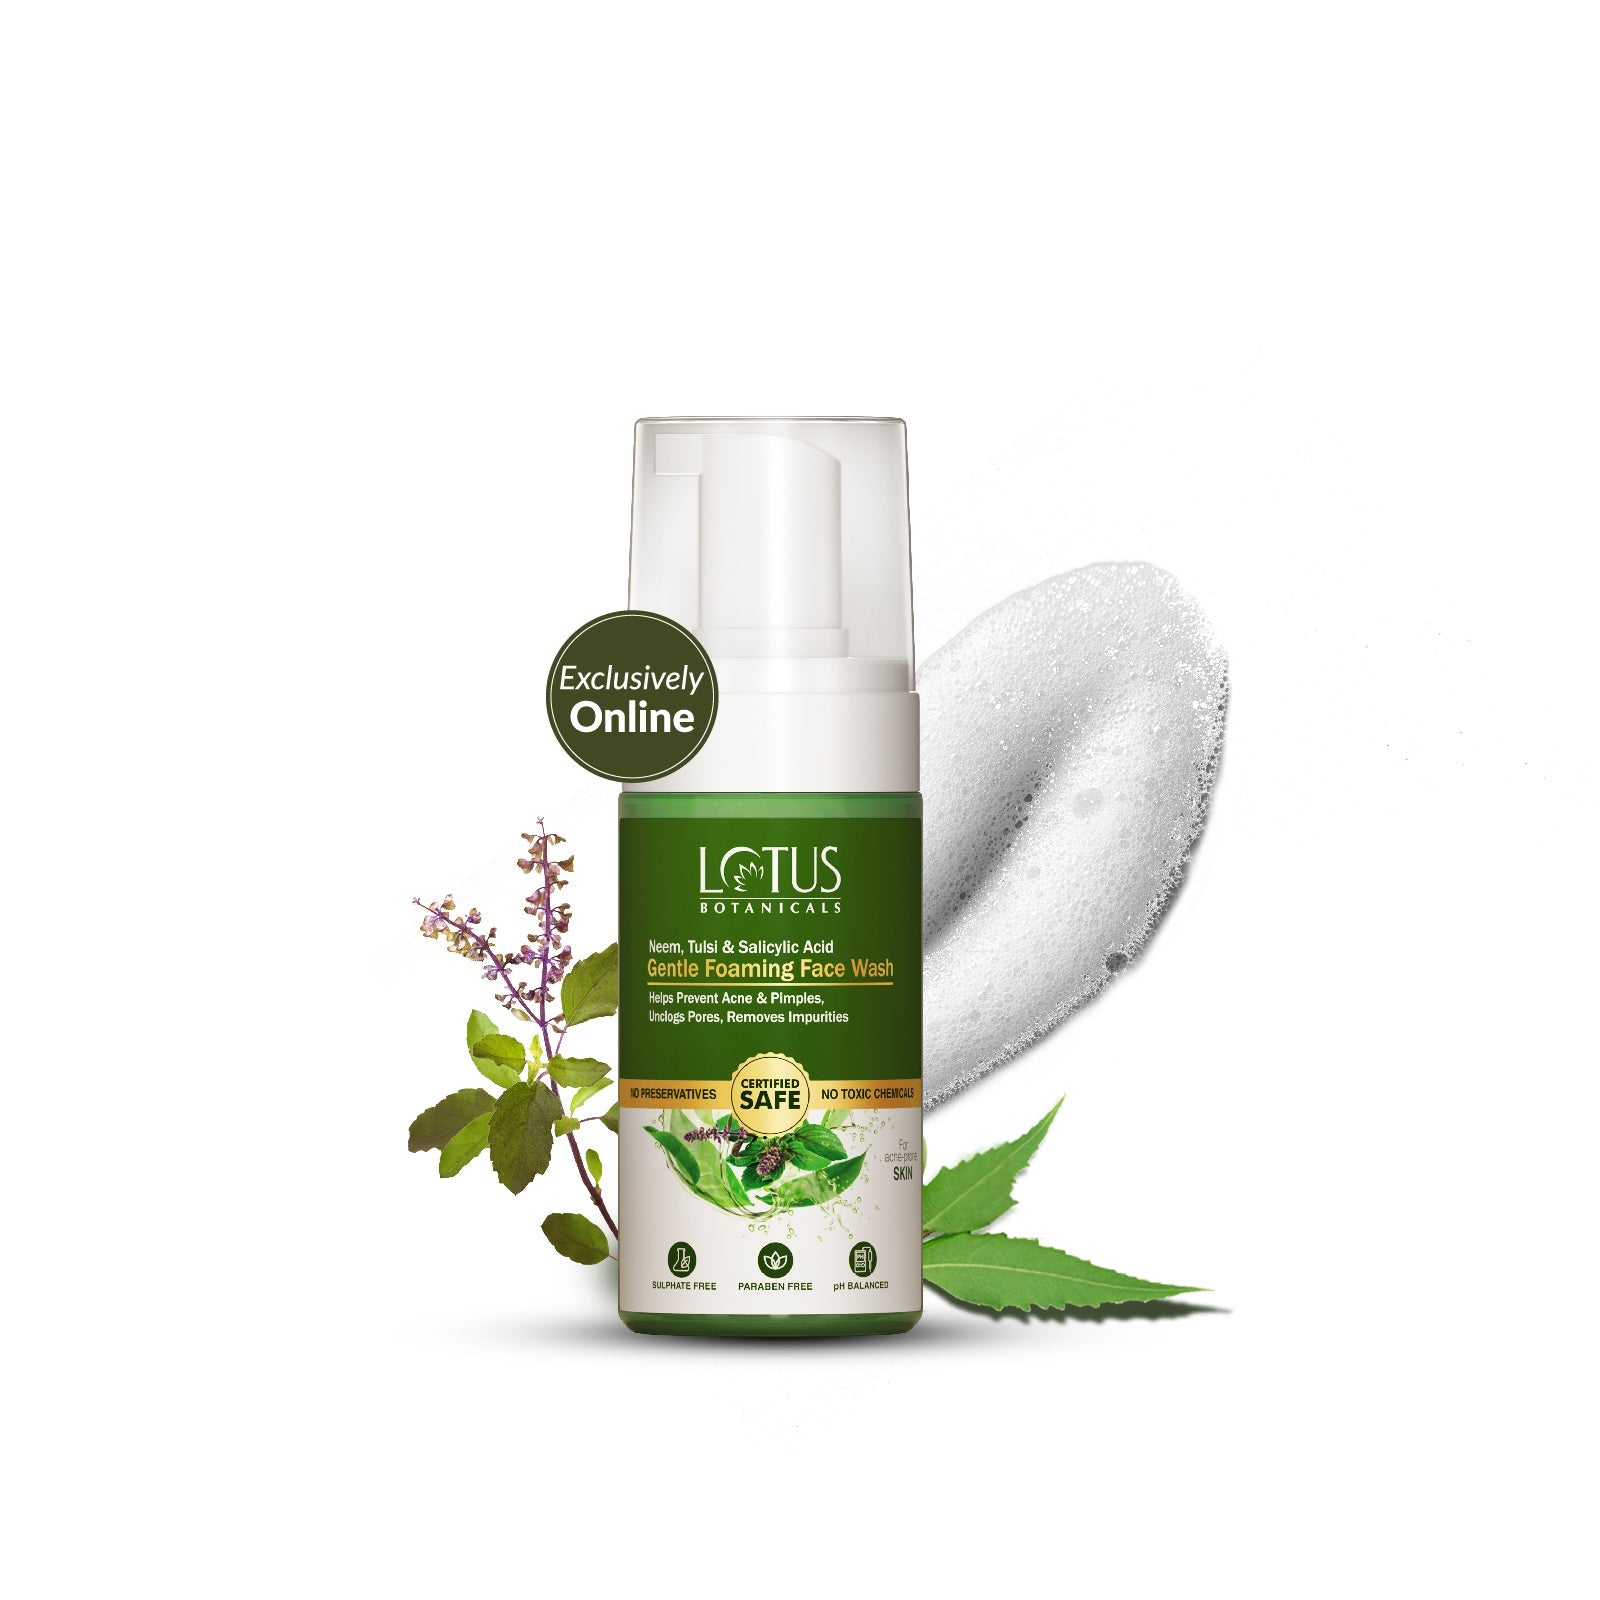 Neem Tulsi Salicylic Acid Gentle Foaming Face Wash - Cleansing and Purifying Facial Cleanser with Natural Ingredients